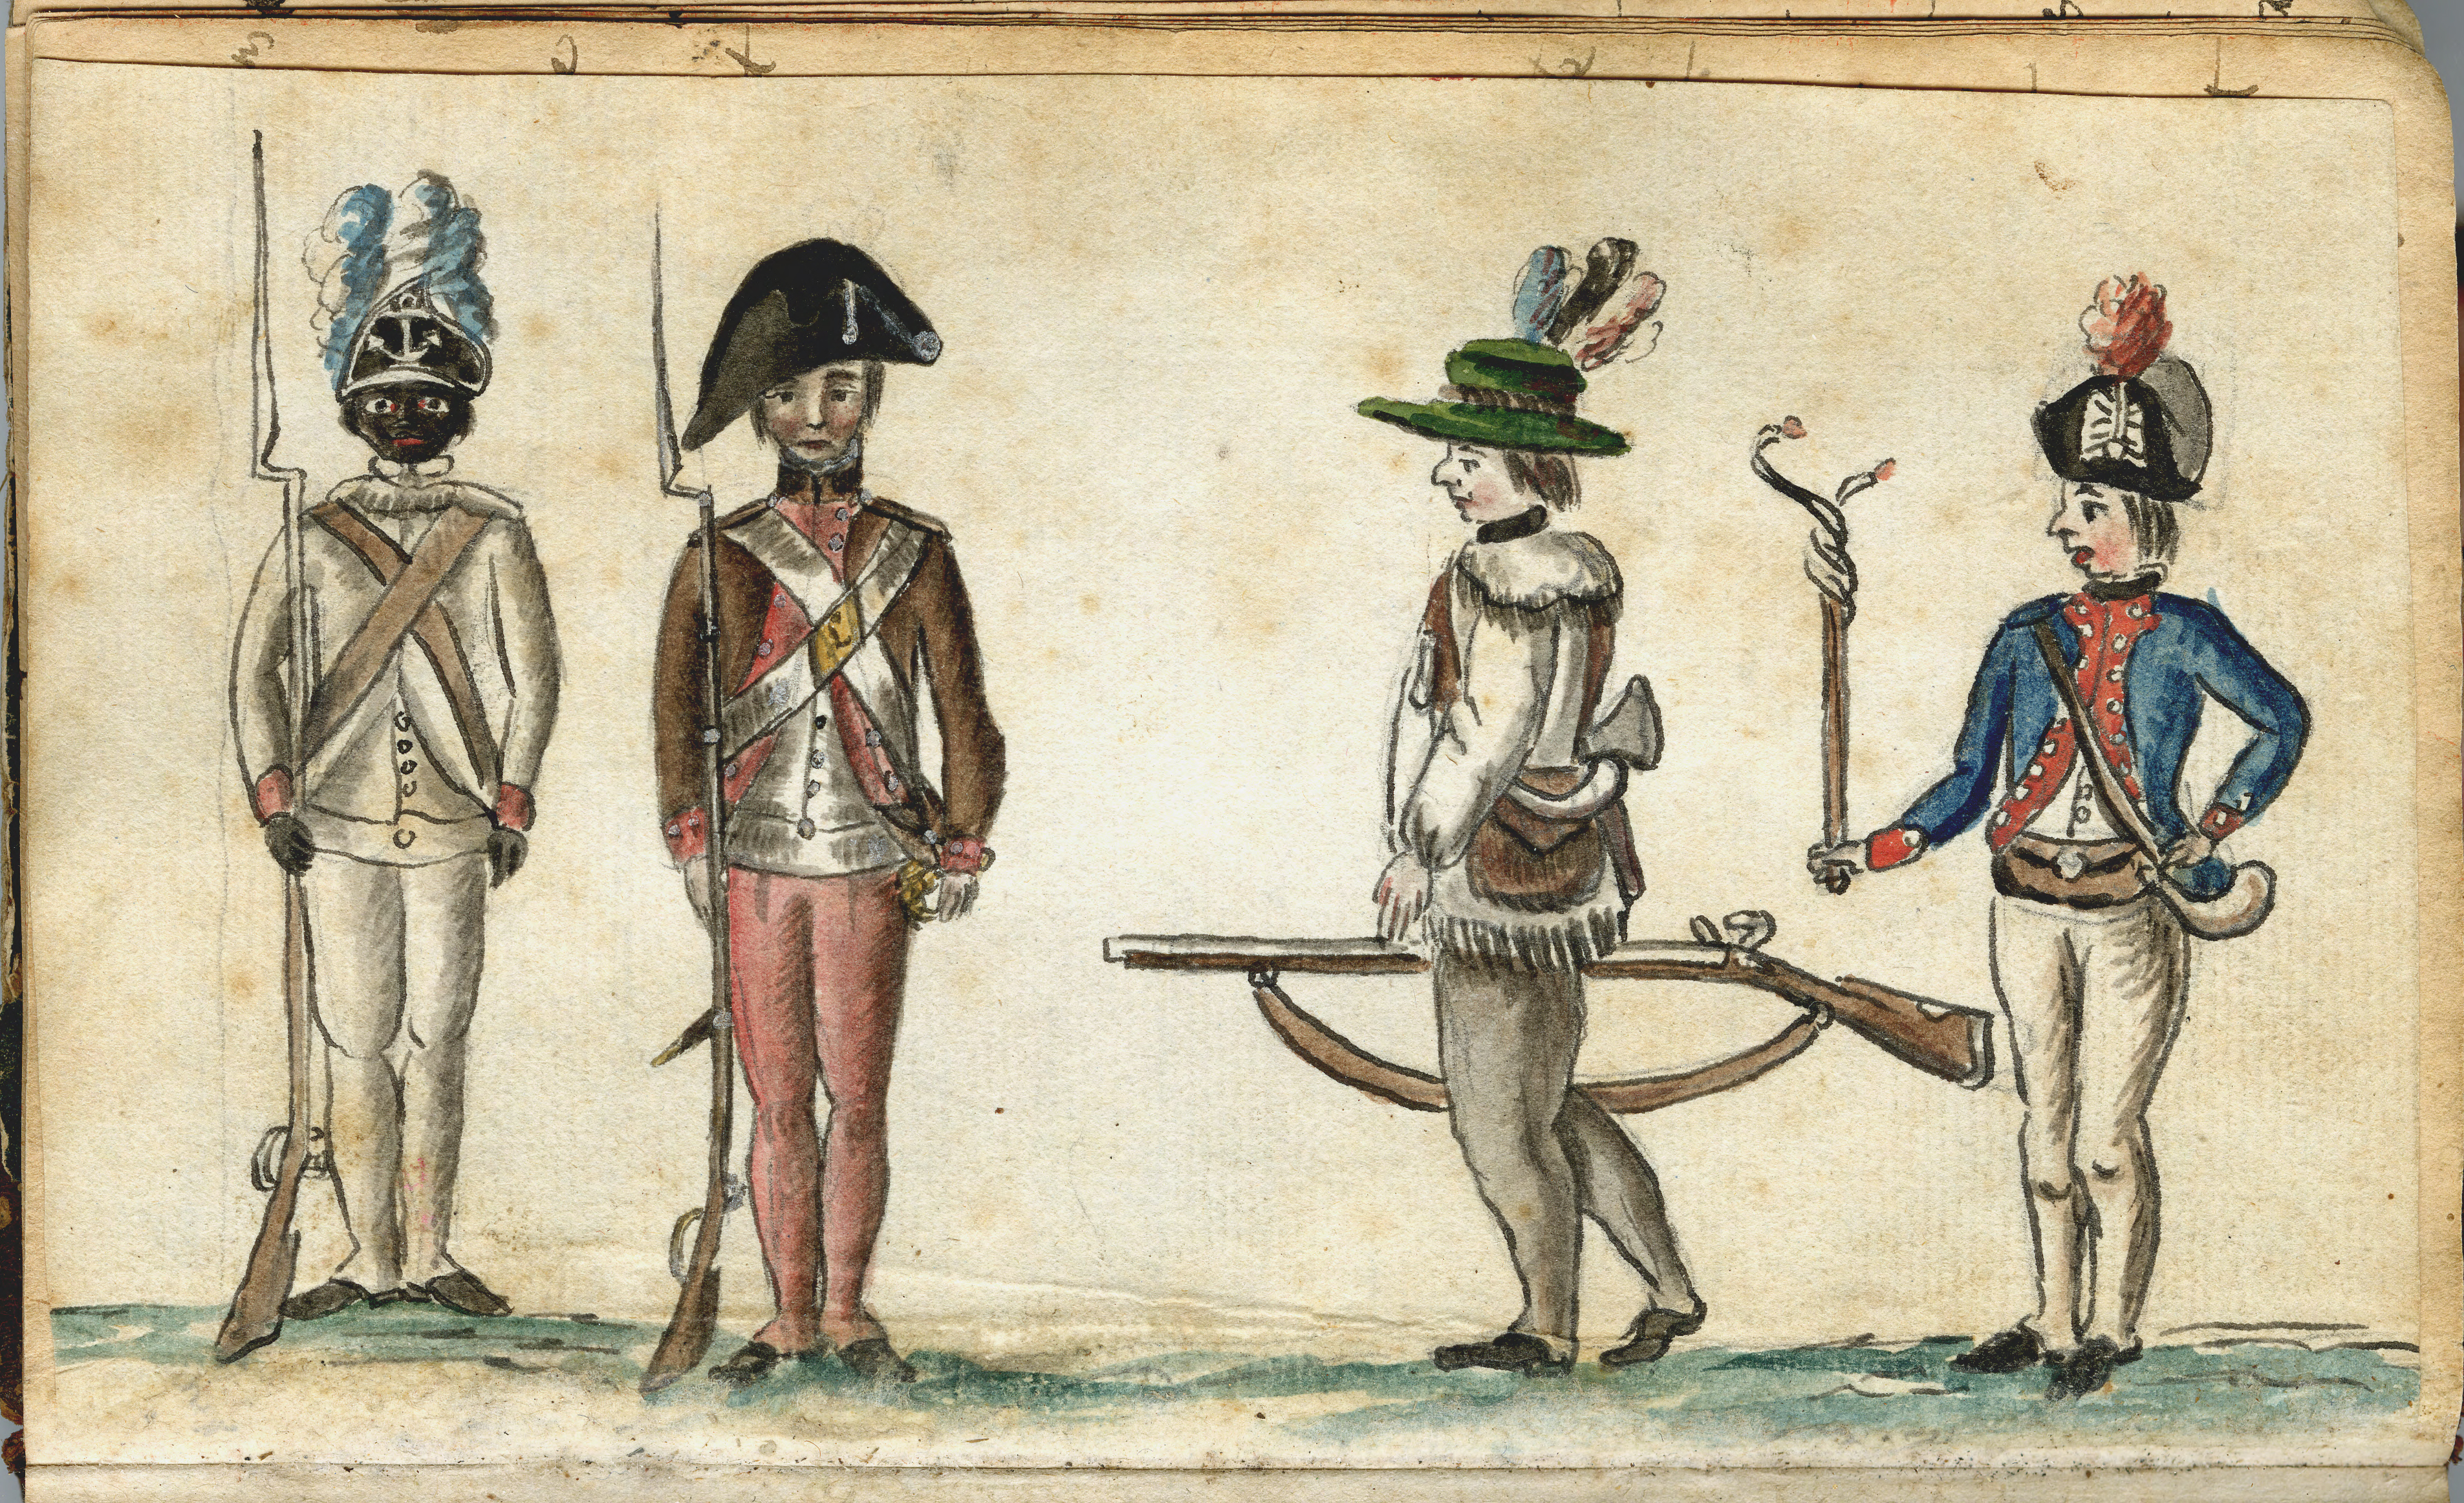 Image Credit: Verger, Jean Baptiste Antoine de, "Soldiers in uniform" (1781). Prints, Drawings and Watercolors from the Anne S.K. Brown Military Collection. Brown Digital Repository. Brown University Library.